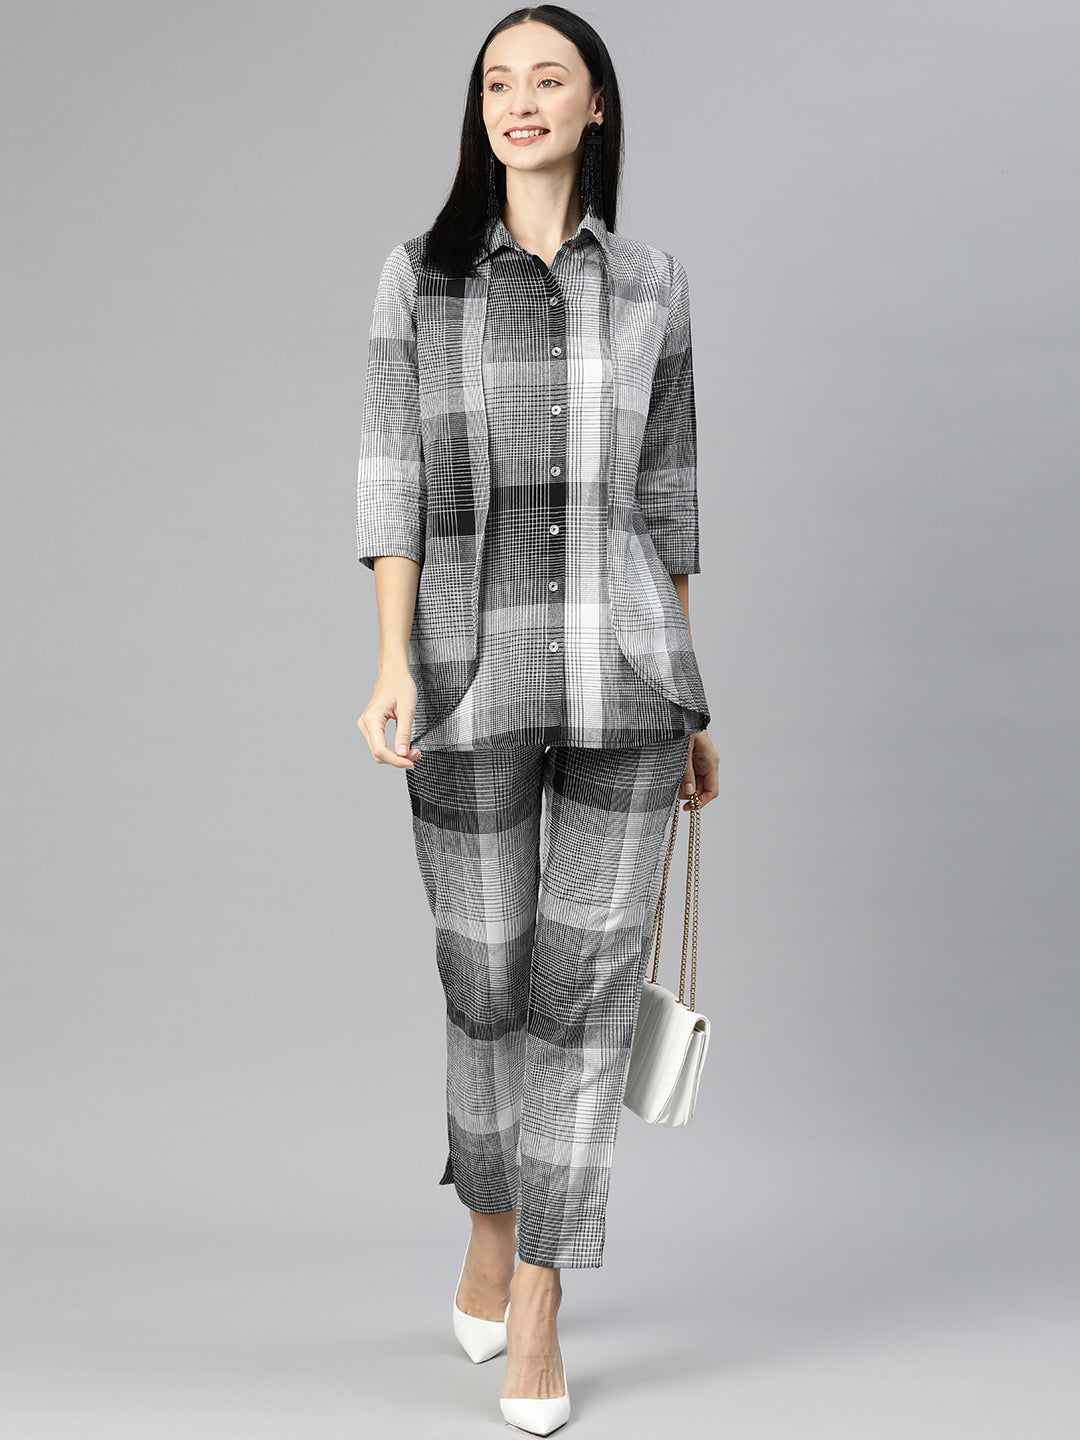 Cottinfab Women Checked Cotton Shirt with Trousers